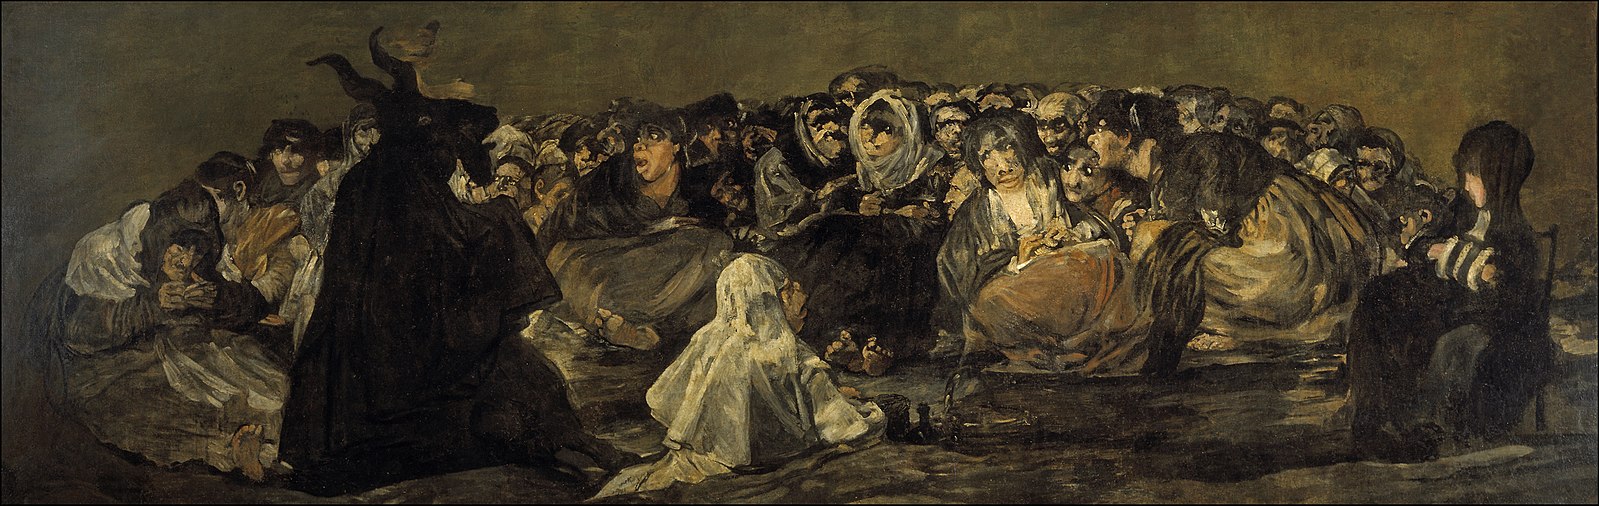 A bunch of people surrounding a dark horned figure drinking a eating